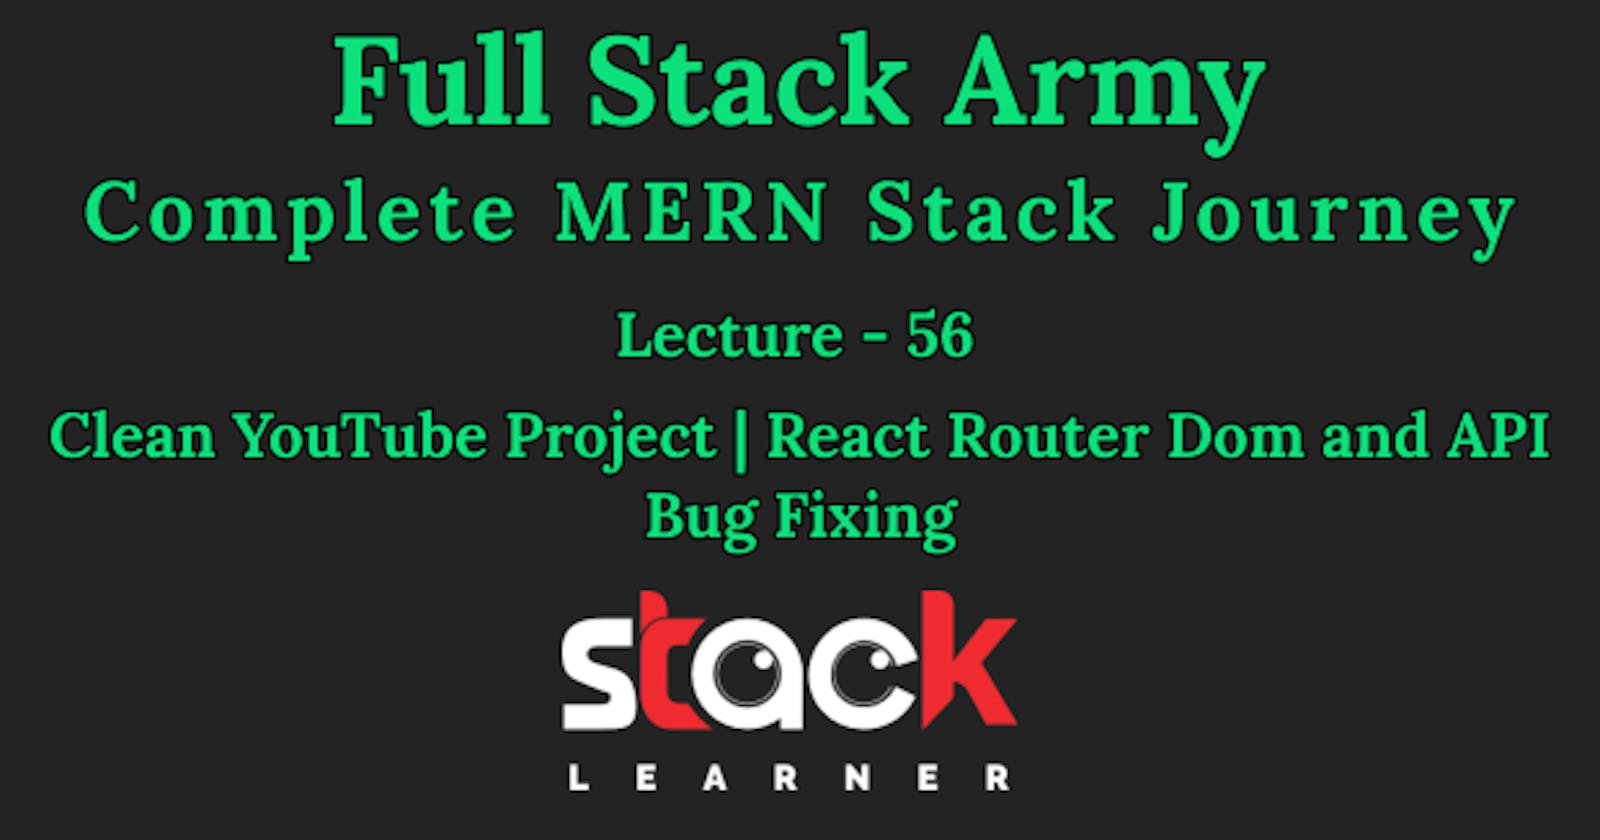 Lecture 56 - Clean YouTube Project | React Router Dom and API Bug Fixing